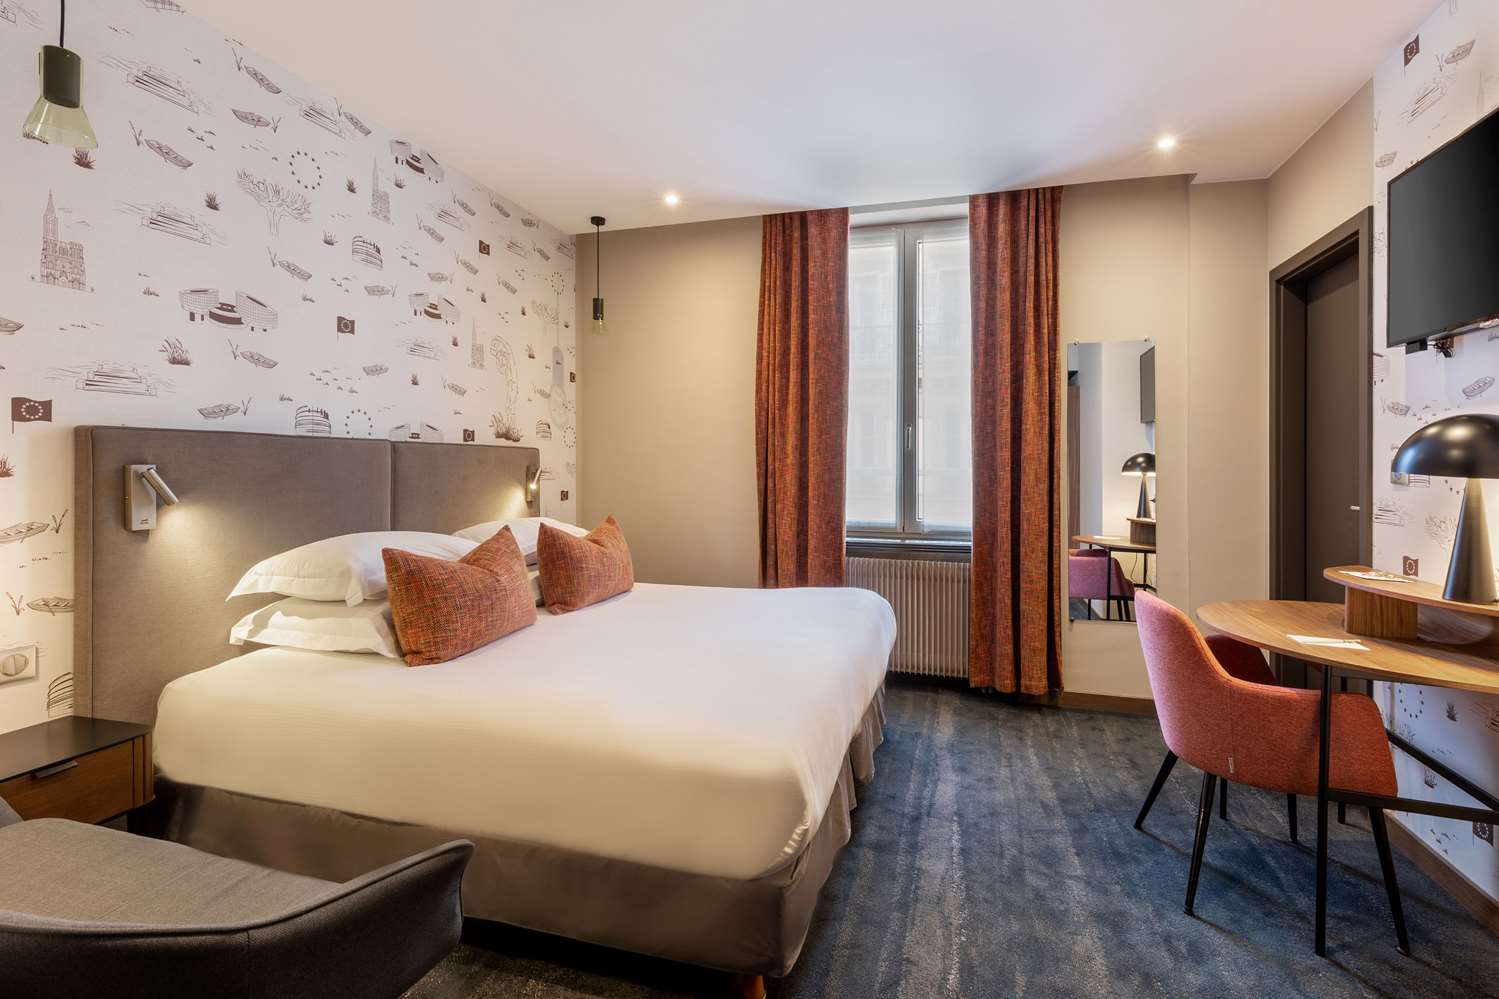 The Chess Hotel Is Your Peaceful Retreat In Lively Paris - Food Republic